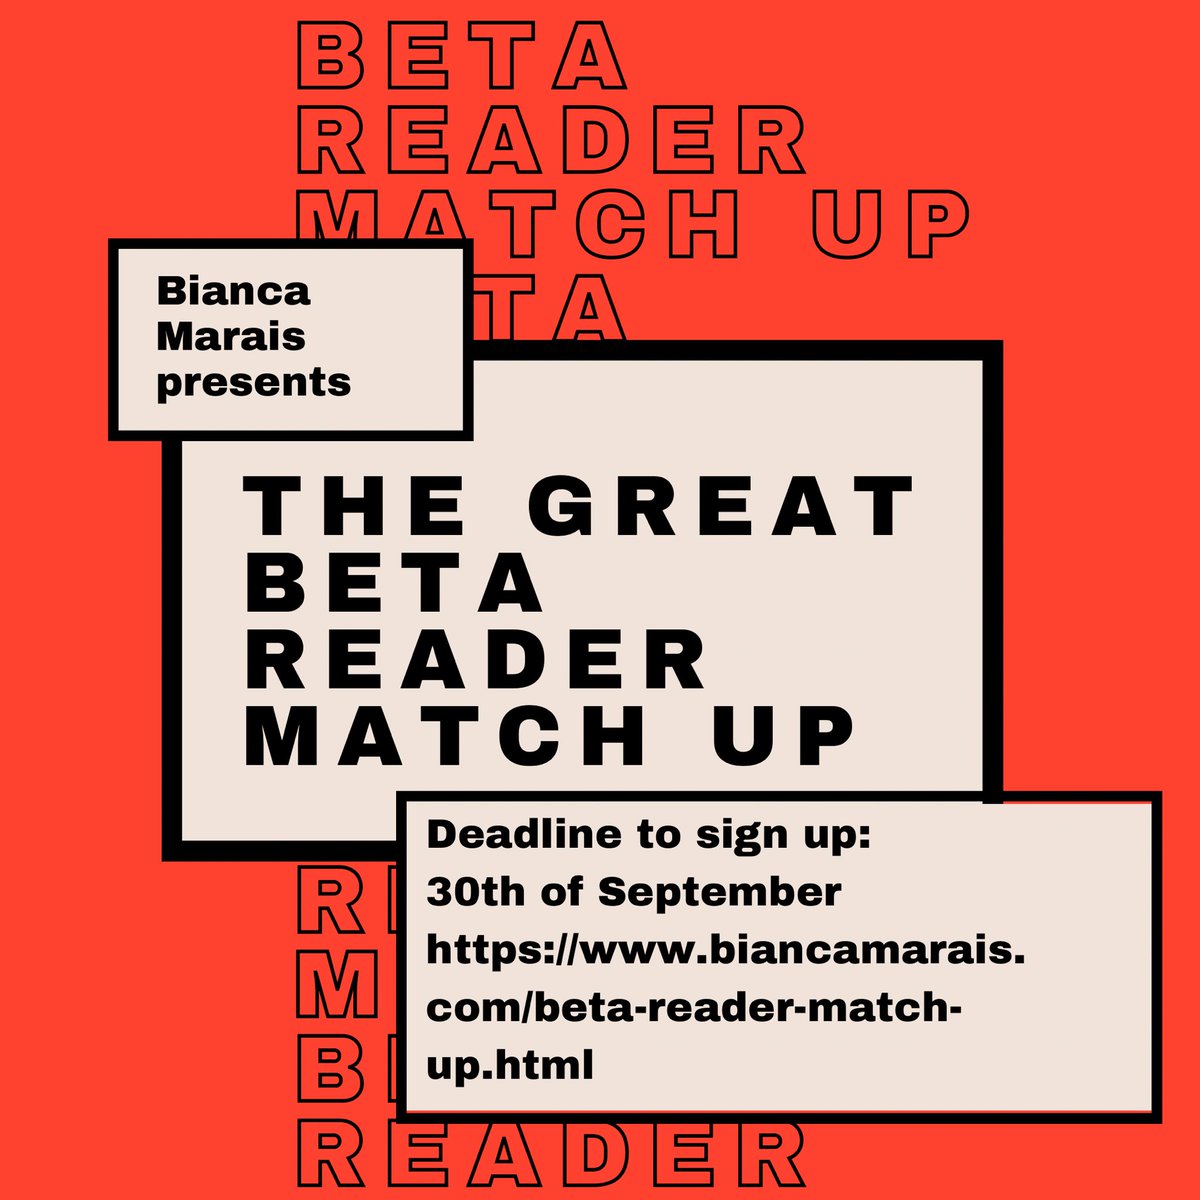 You have until midnight on Saturday to sign up for the beta reader match up which looks like it’s going to be our biggest one yet! 👏🏼👏🏼👏🏼 biancamarais.com/beta-reader-ma… #betareader #amwriting #amediting #writer #WritingCommmunity